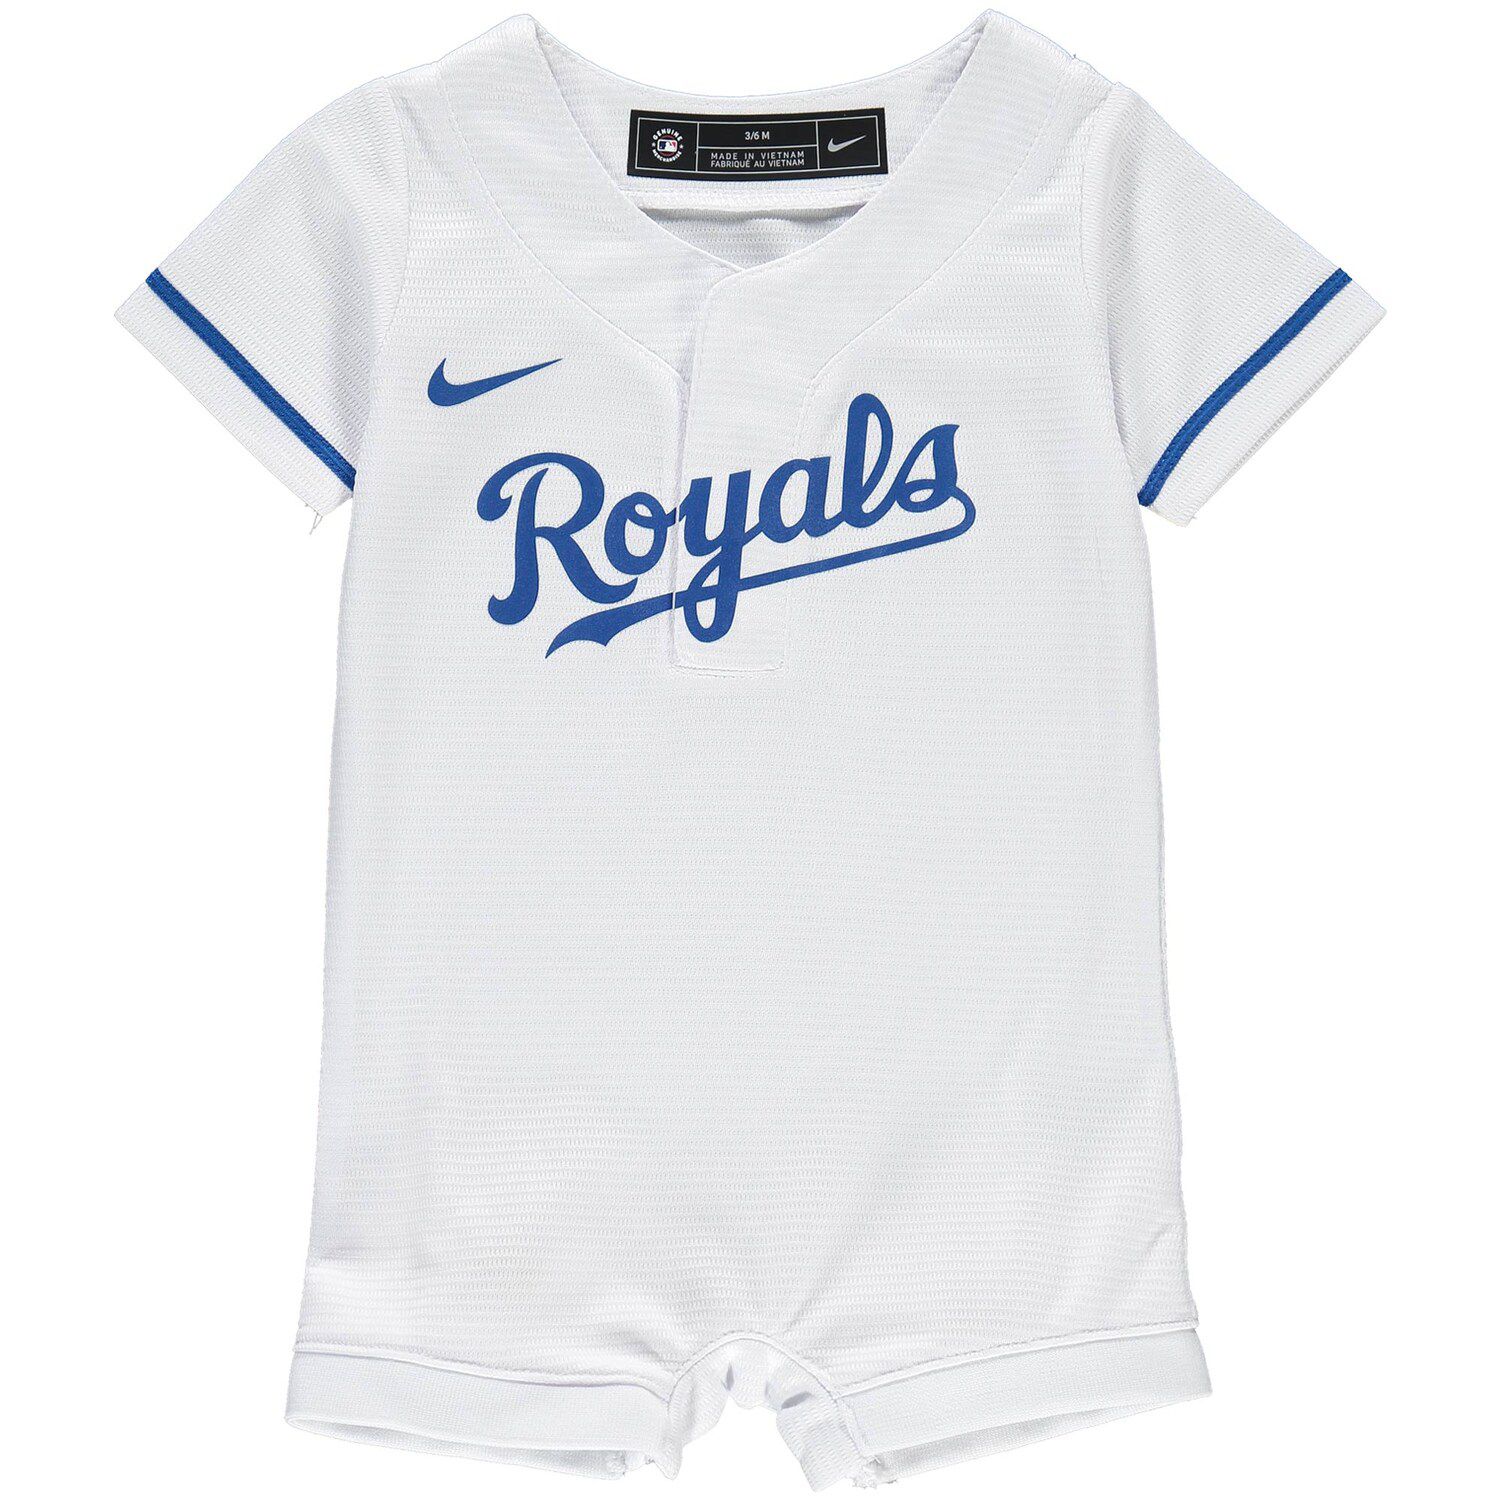 baby blue royals jersey